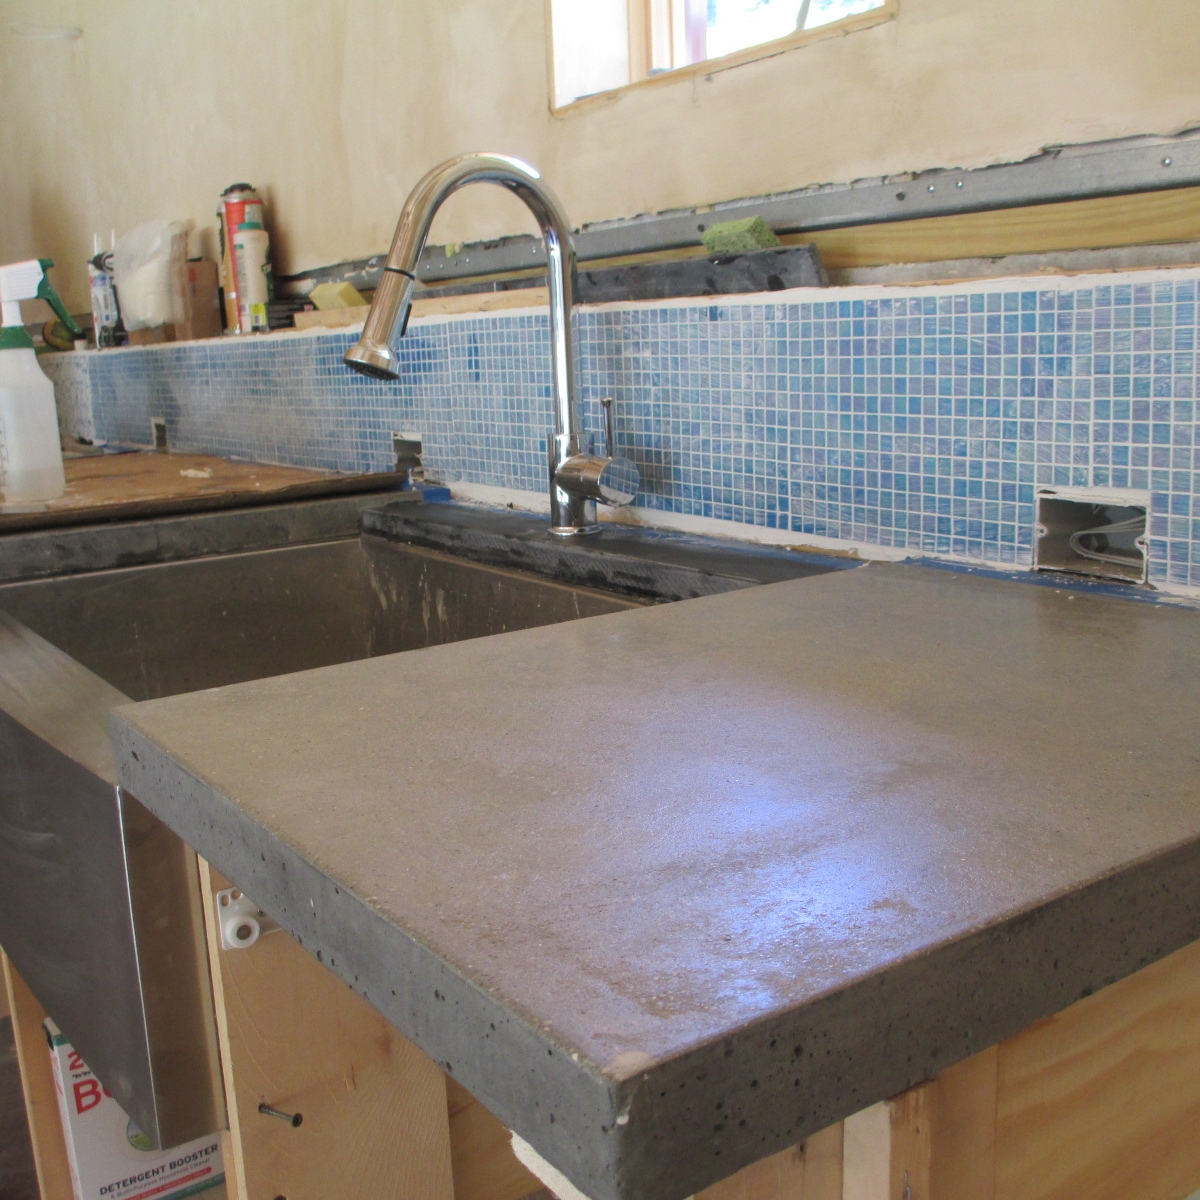  steel troweled finish on a concrete counter 